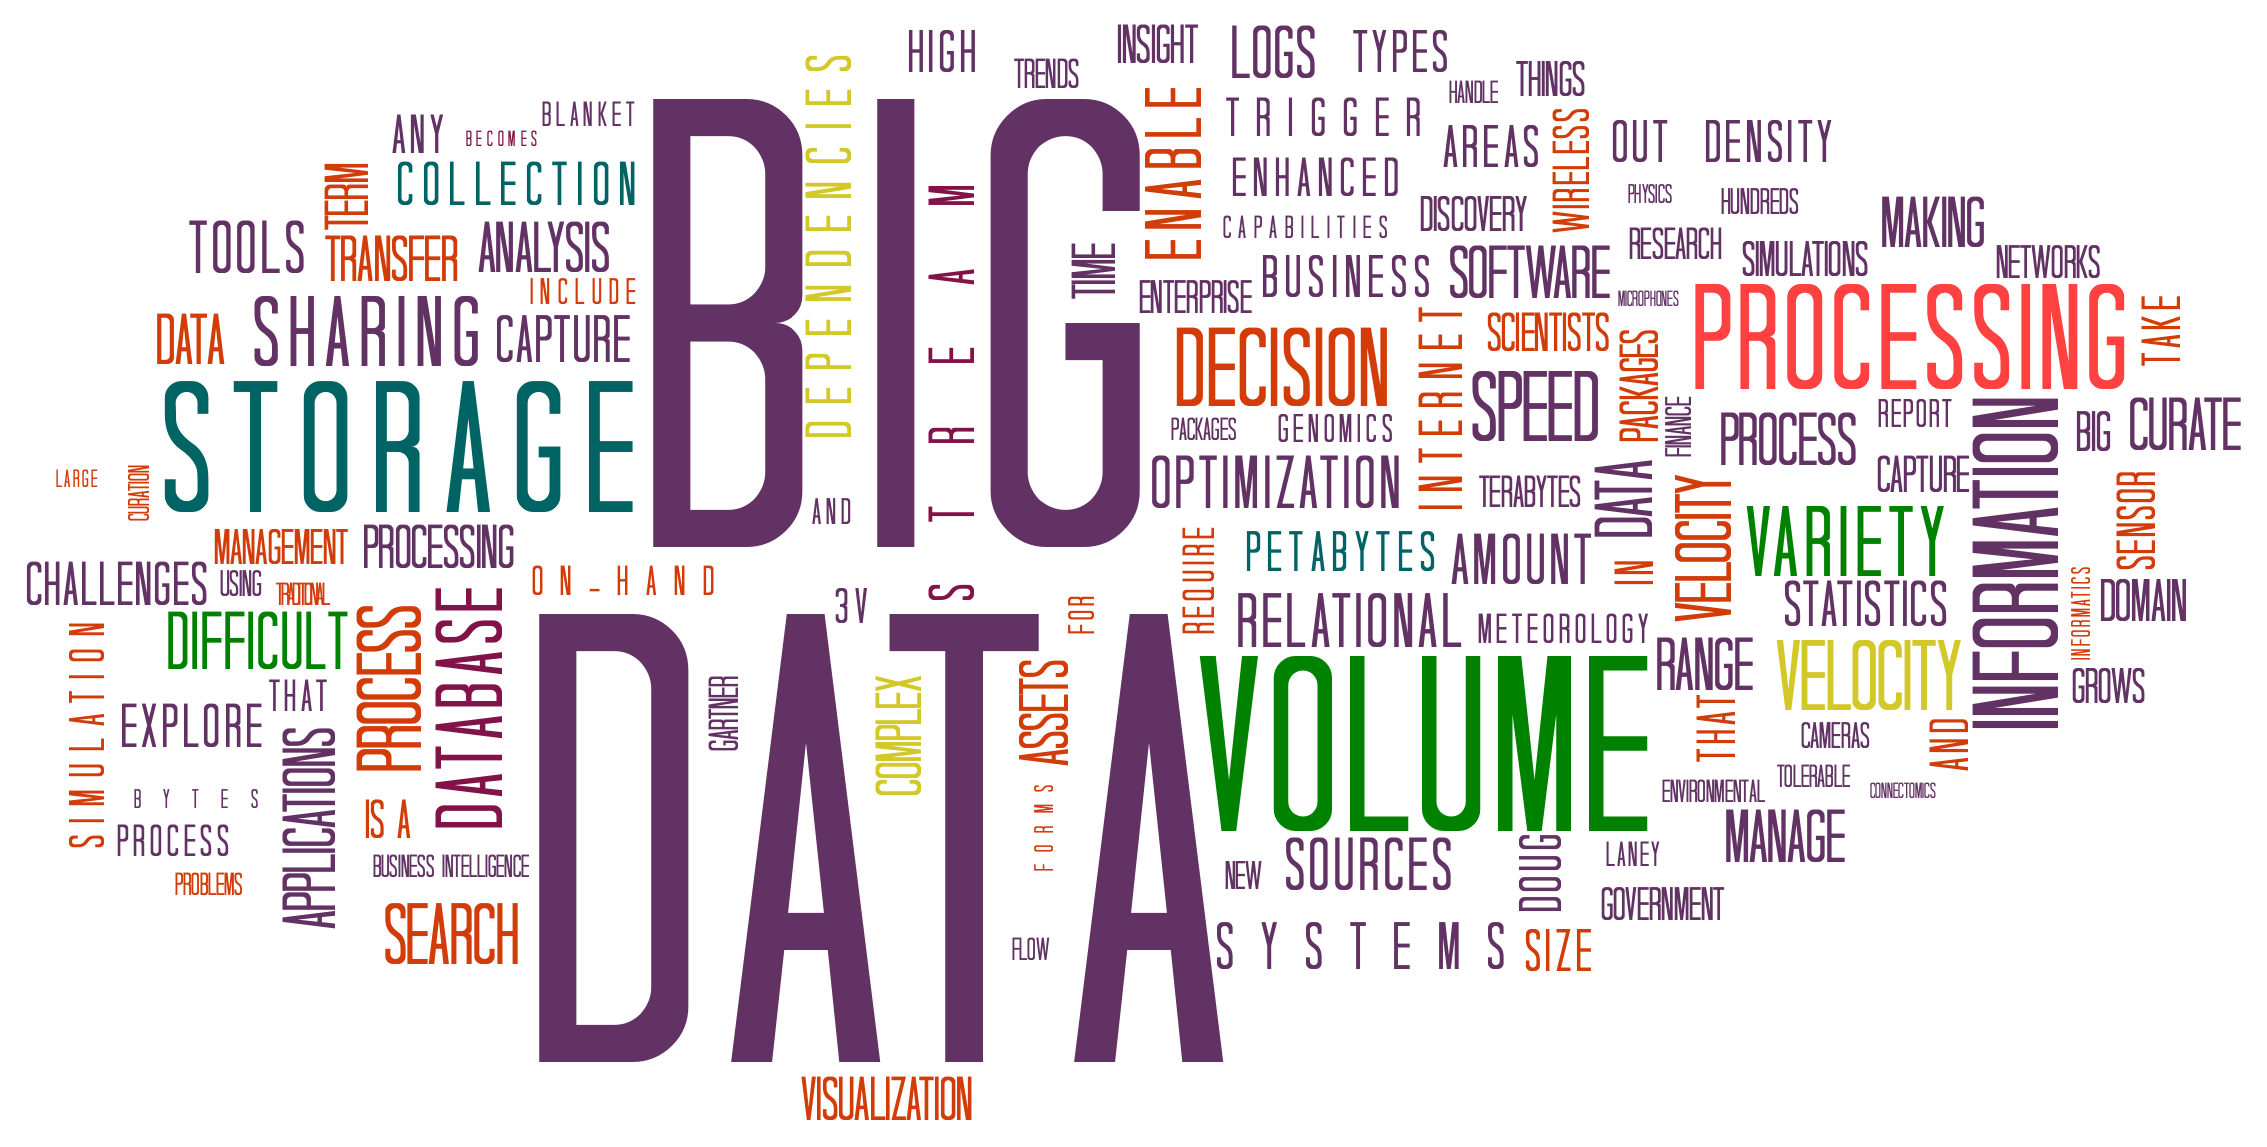 Make Informed Decisions With Big Data Analytics